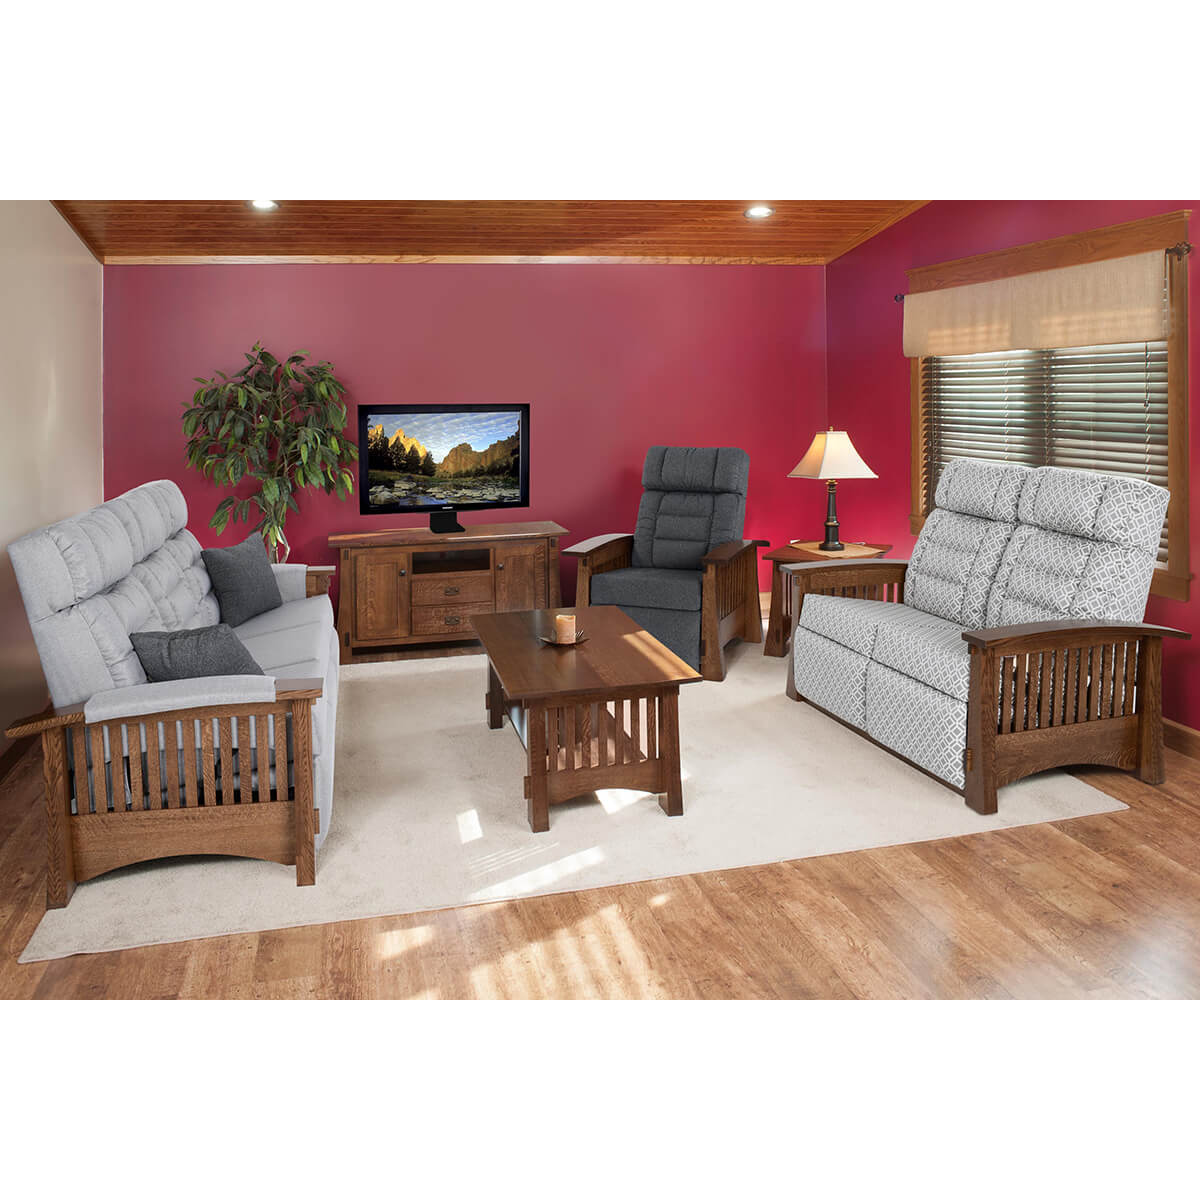 CraftsmanMission88LivingRoomCollection249643